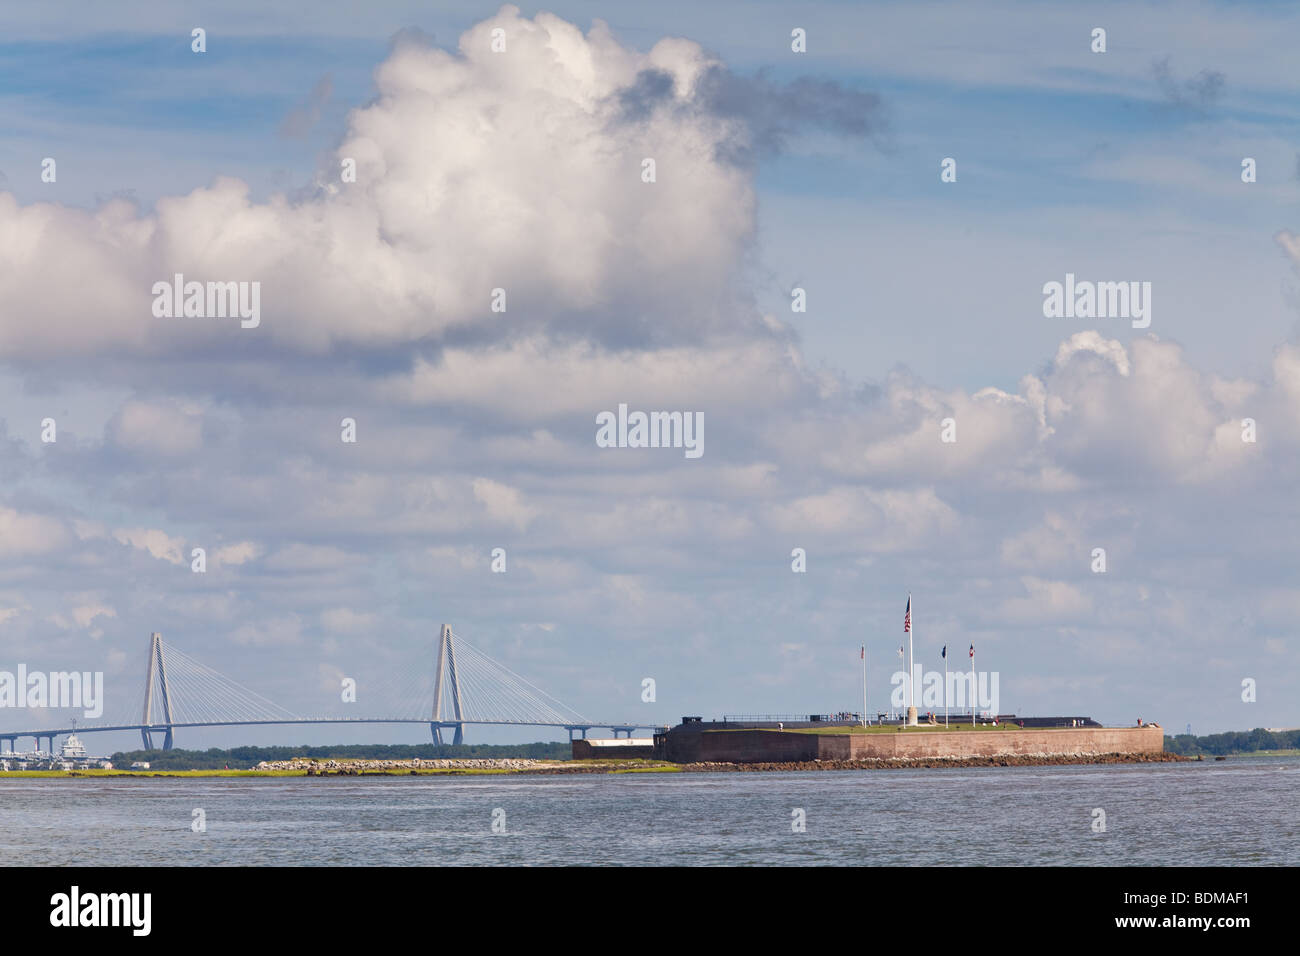 View of historic Fort Sumter, where the Civil War began from the mouth of Charleston Harbor, South Carolina Stock Photo